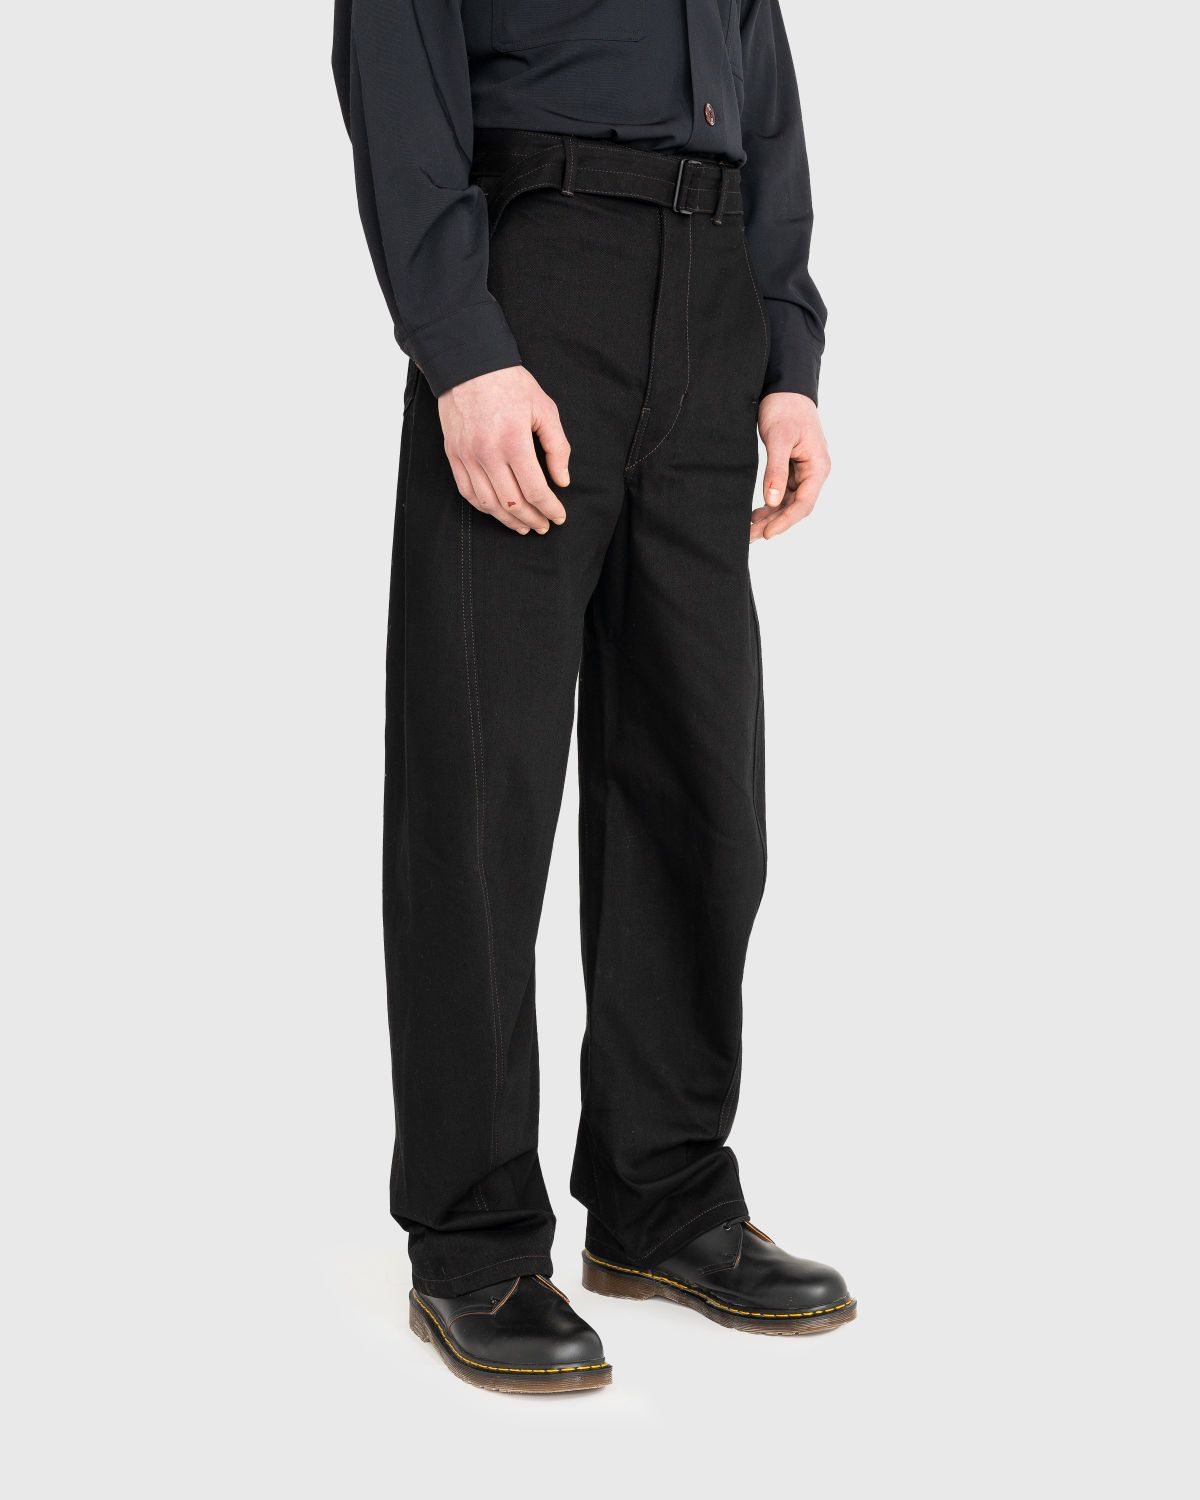 Lemaire – Twisted Belted Pants Black - Trousers - Black - Image 4